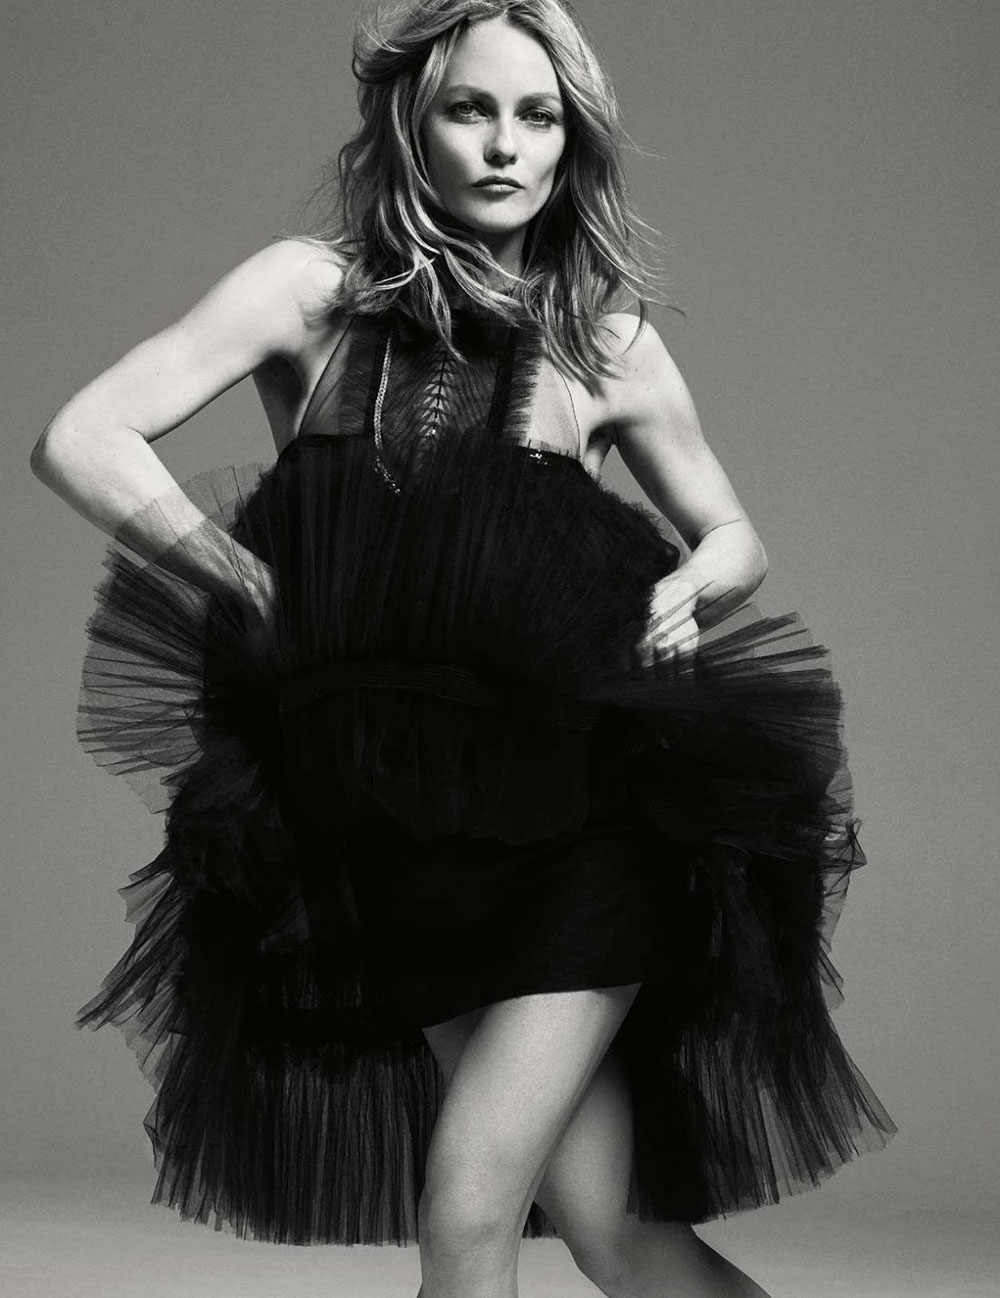 Vanessa Paradis covers Elle France December 21st, 2018 by Philip Gay